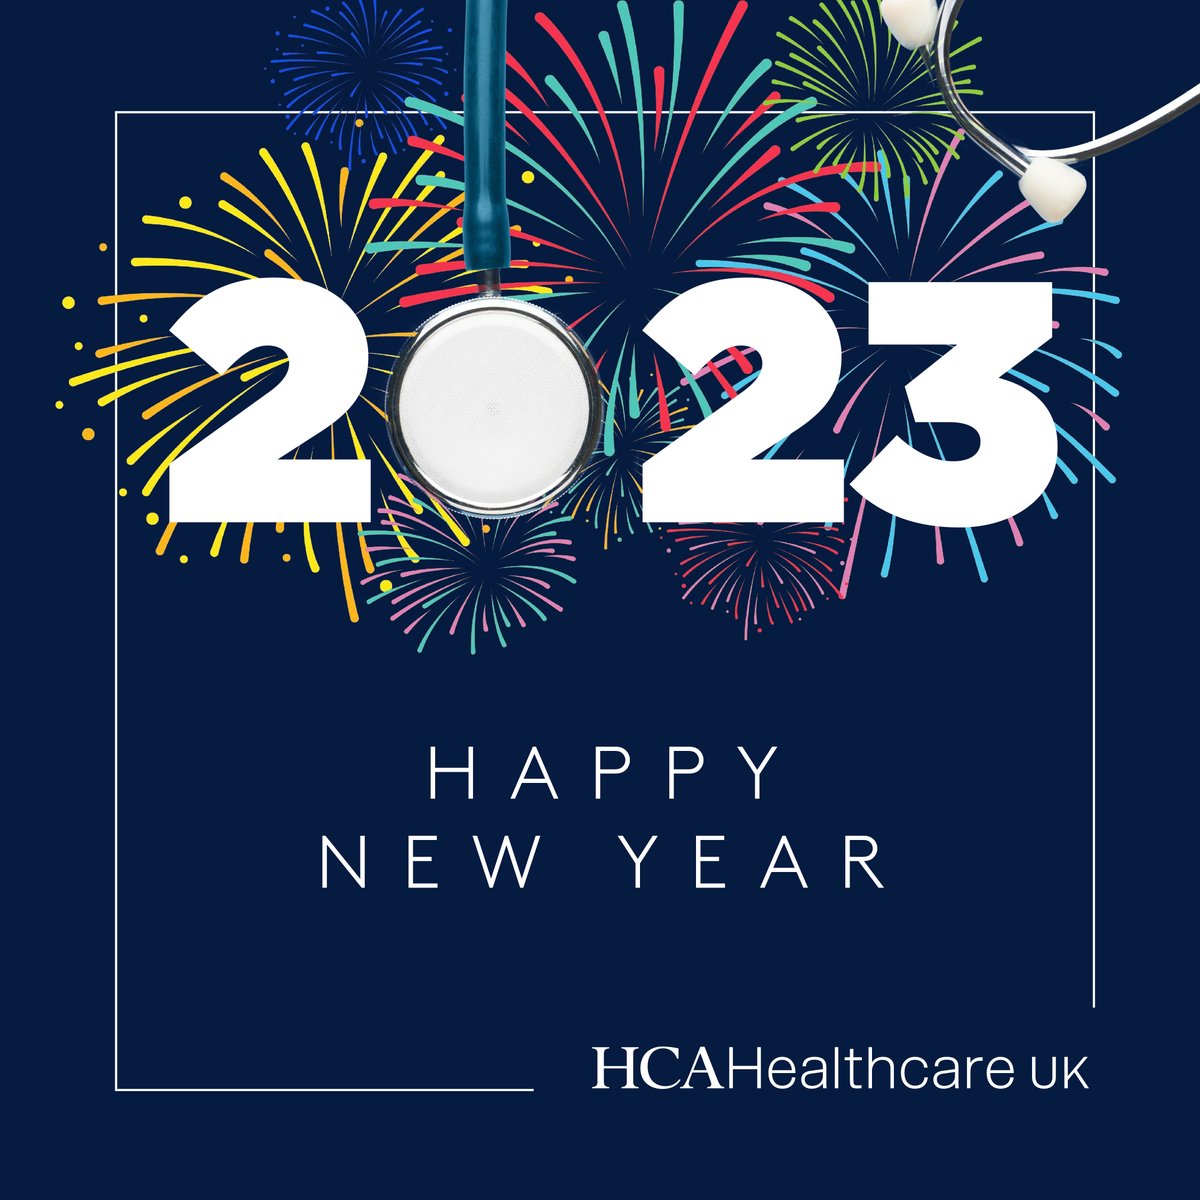 We want to say a heartfelt thank you to all of our patients, colleagues and partners. Wishing you all the best for your goals and resolutions for 2023!